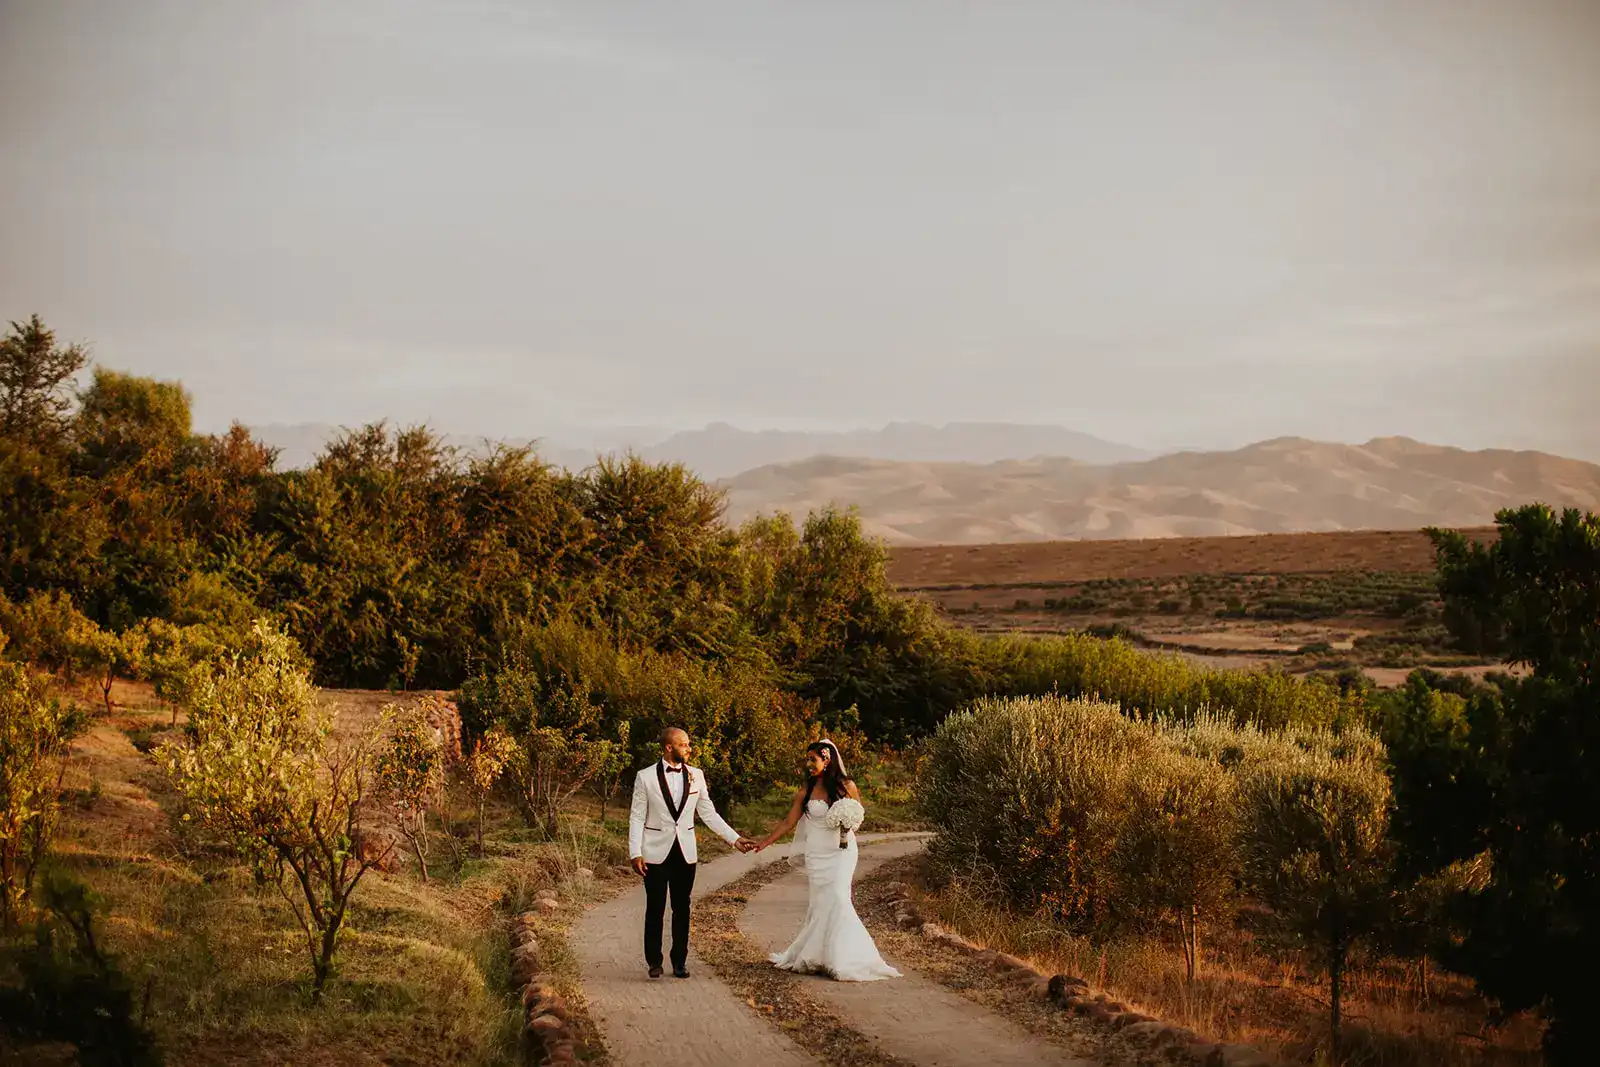 When is the best time of the year to get married in Morocco?